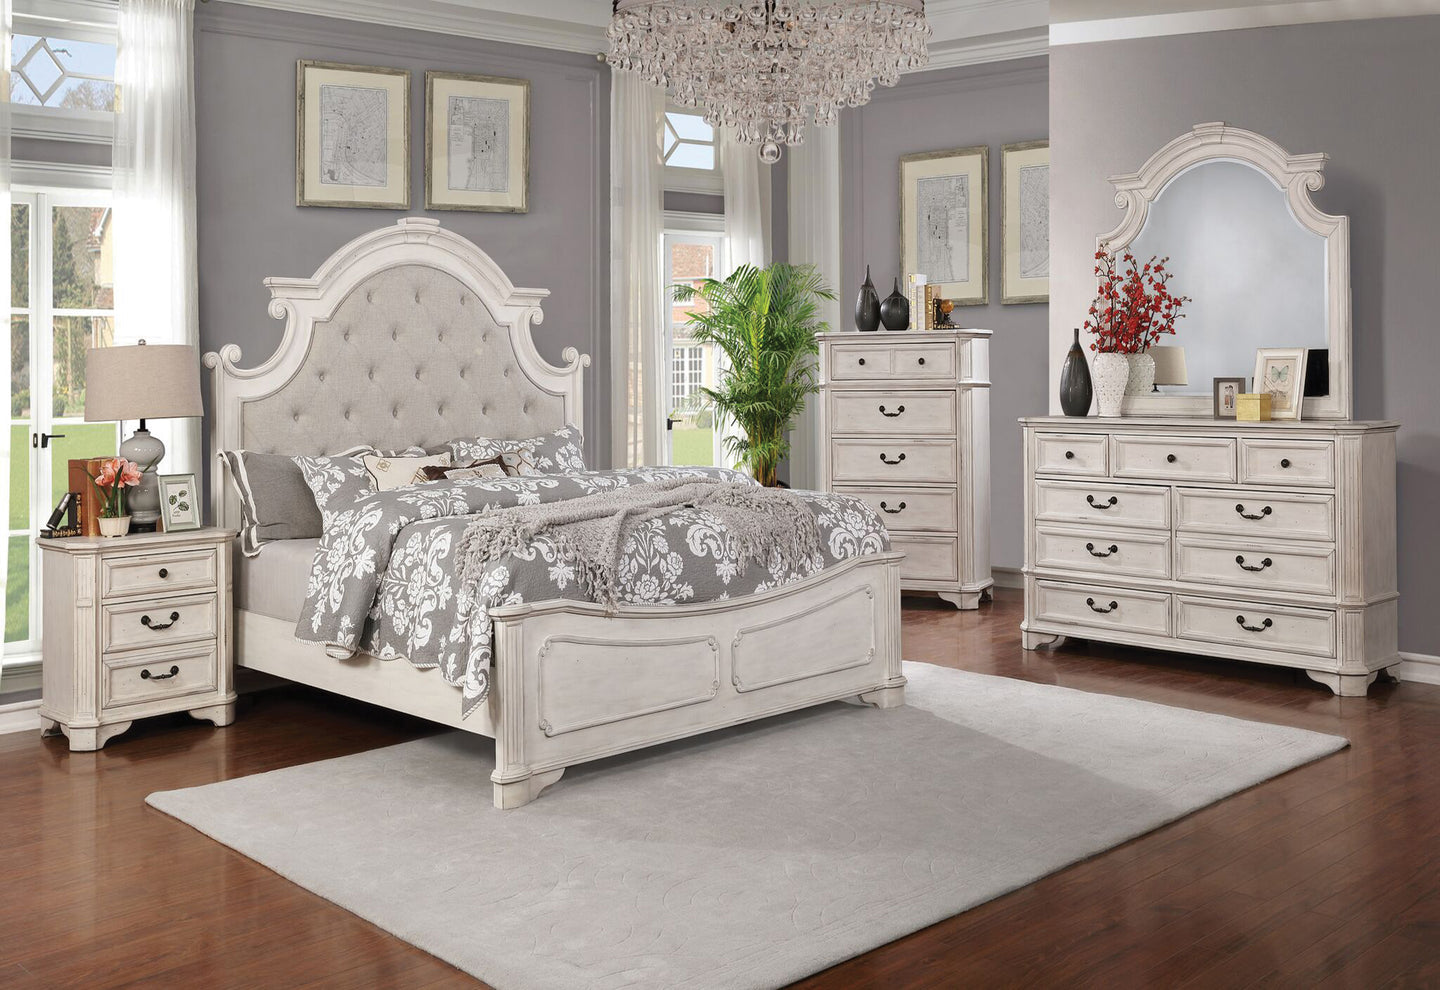 country french style bedroom in an antique white finish – acacia